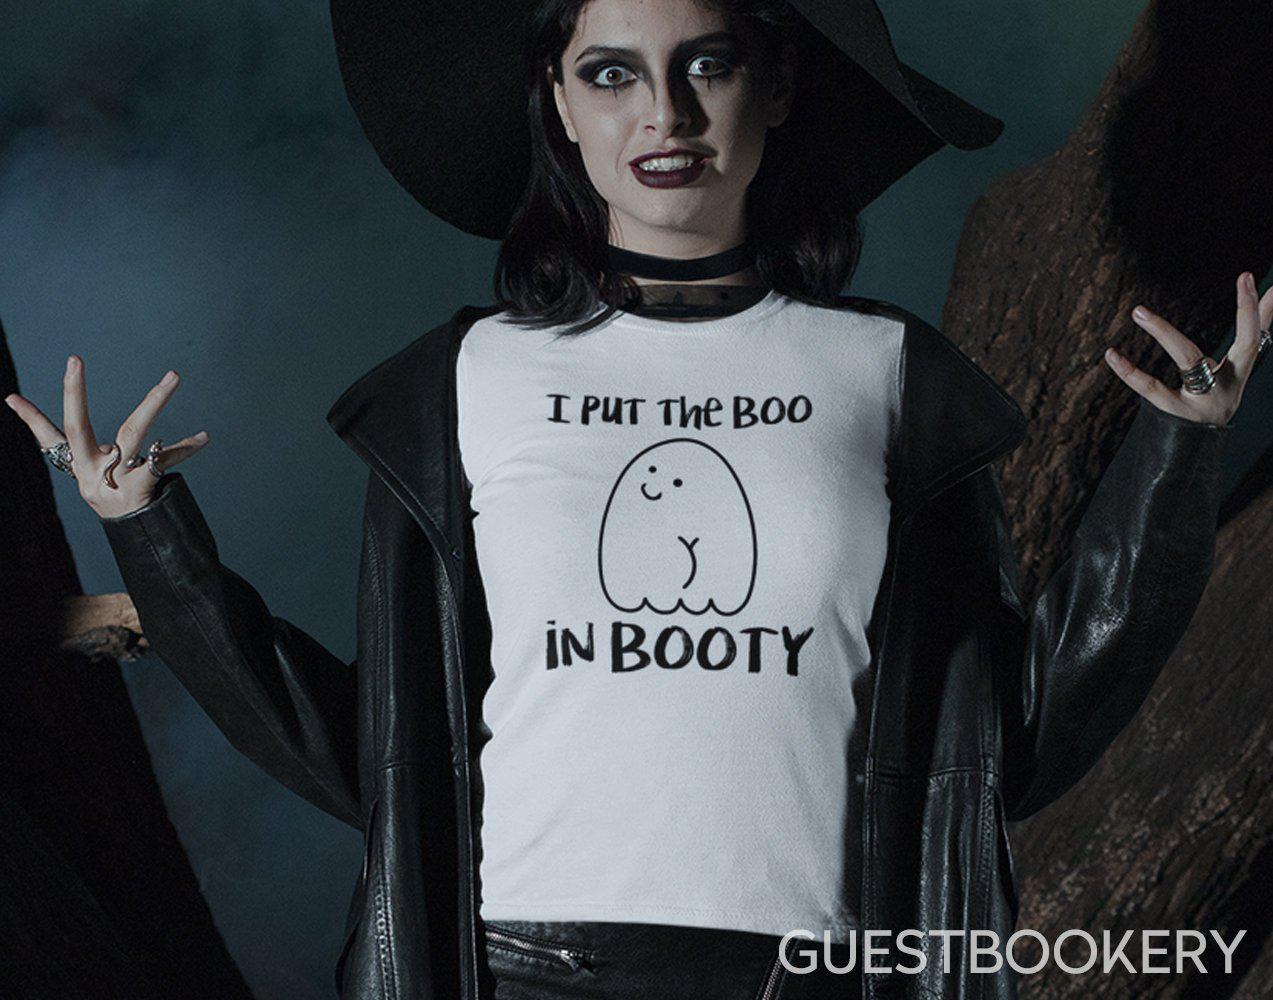 I Put the Boo in Booty T-shirt